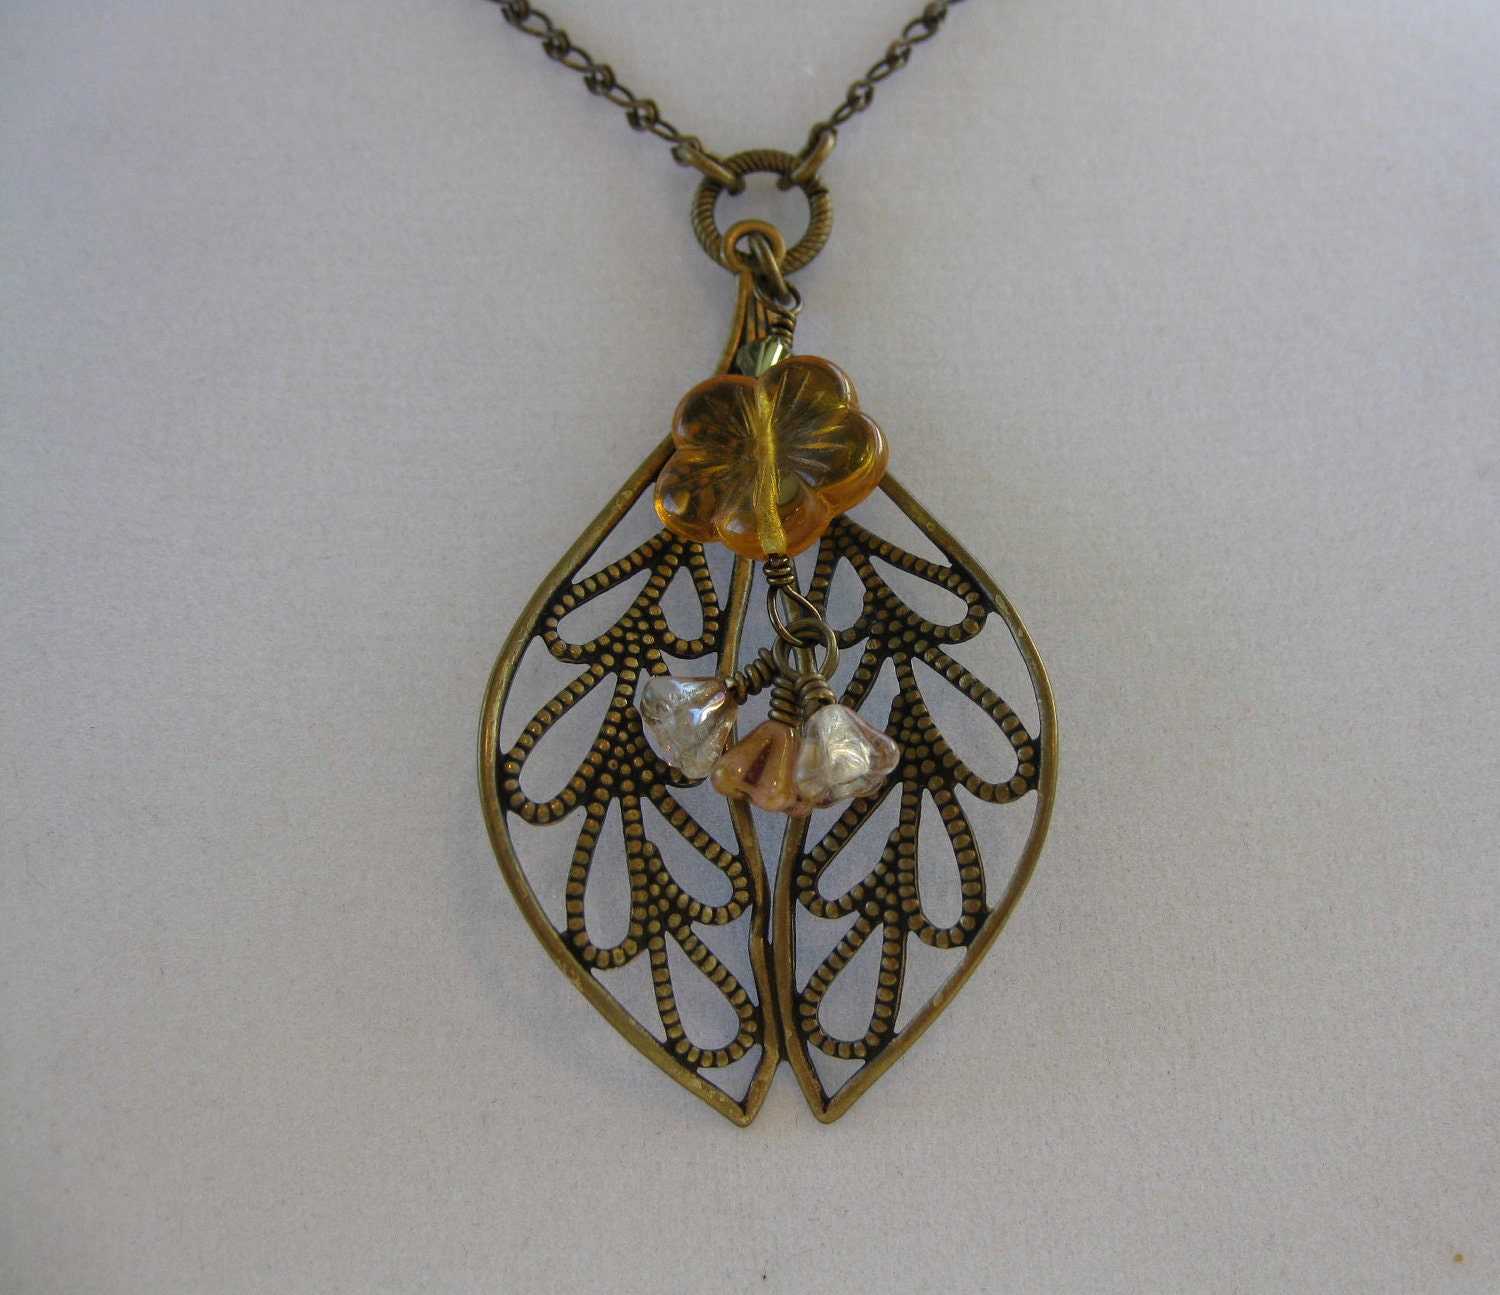 Cascading flowers on a filigree in brass ox necklace